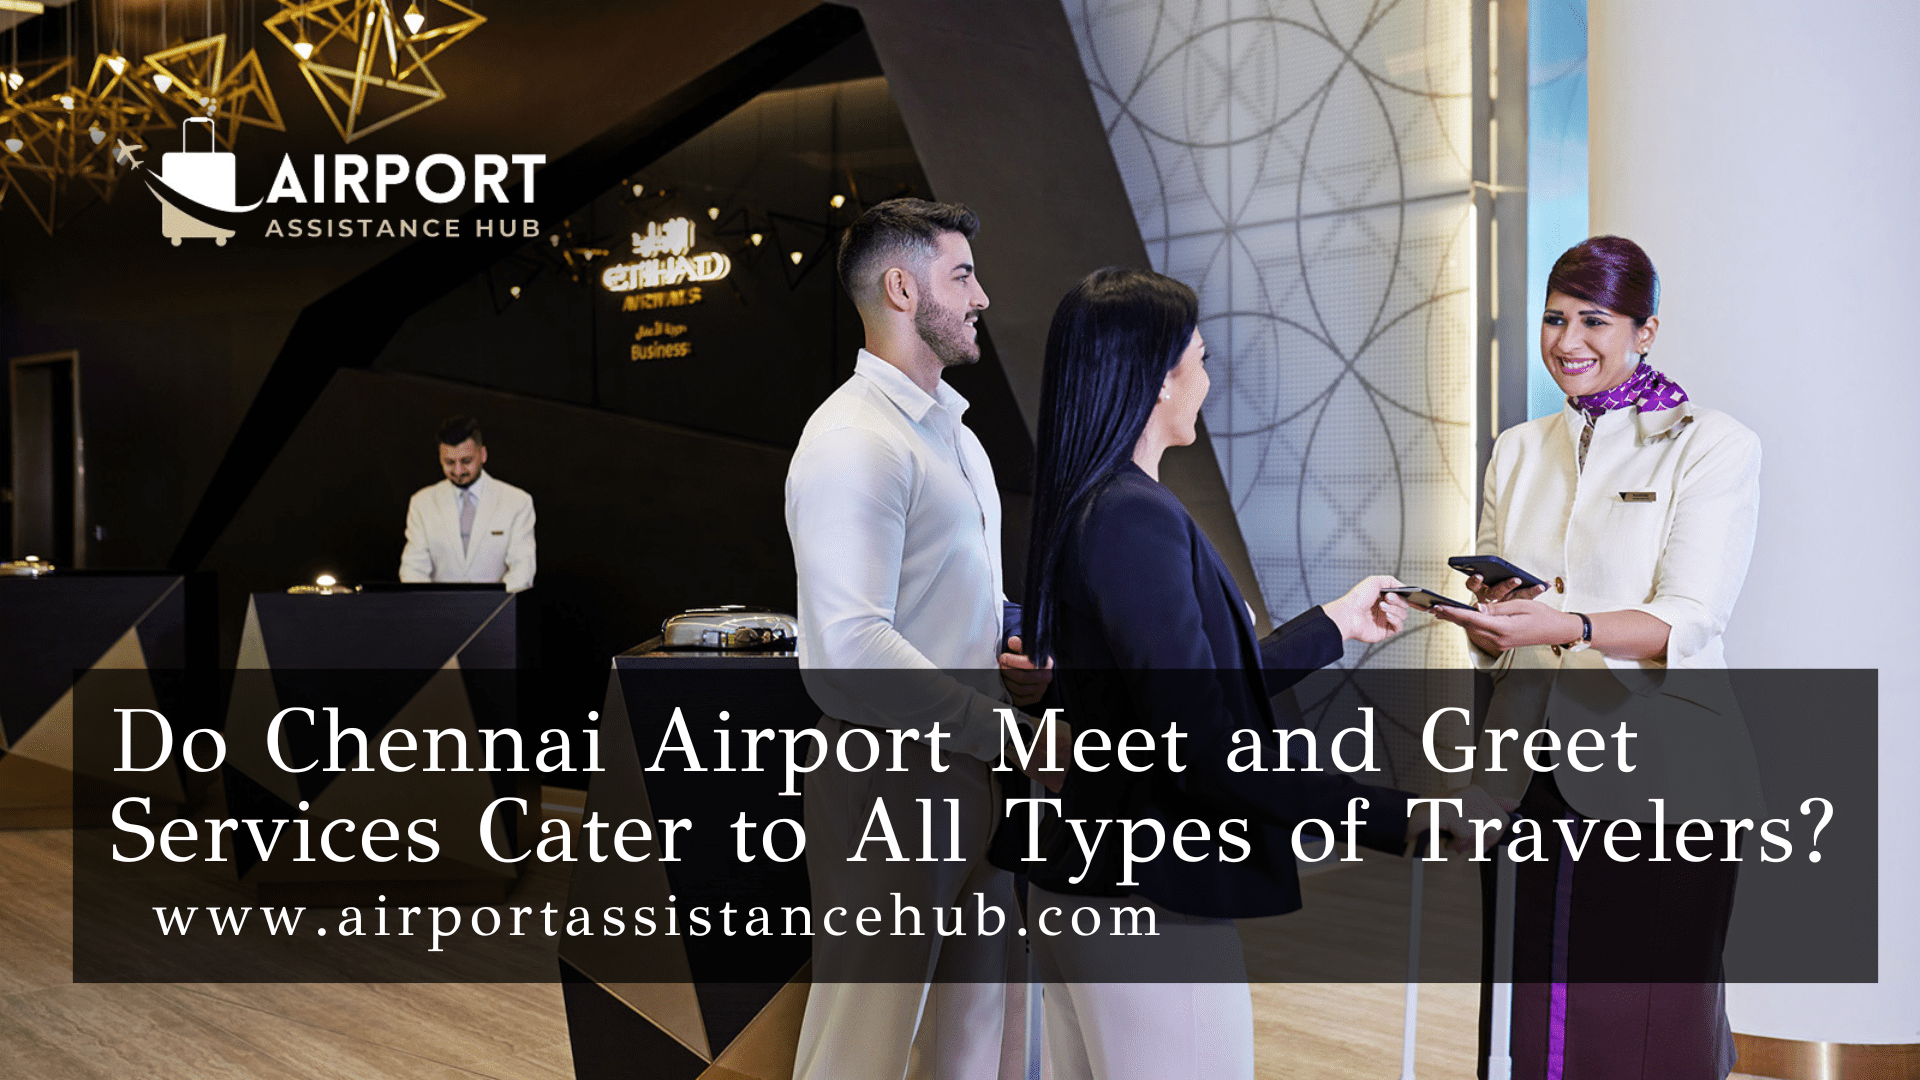 Do Chennai Airport Meet and Greet Services Cater to All Types of Travelers?